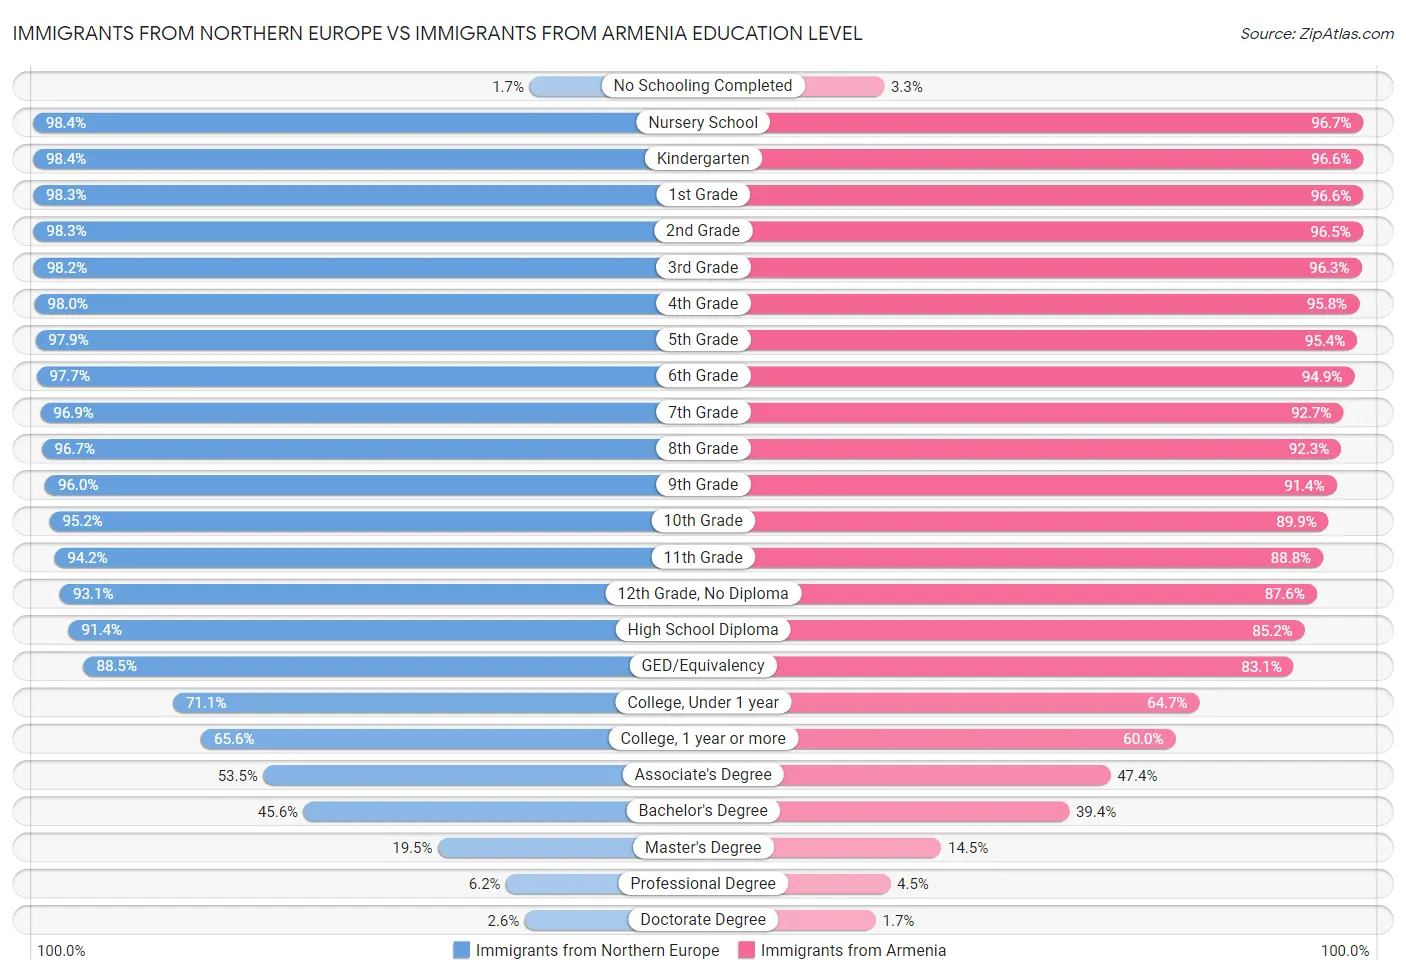 Immigrants from Northern Europe vs Immigrants from Armenia Education Level